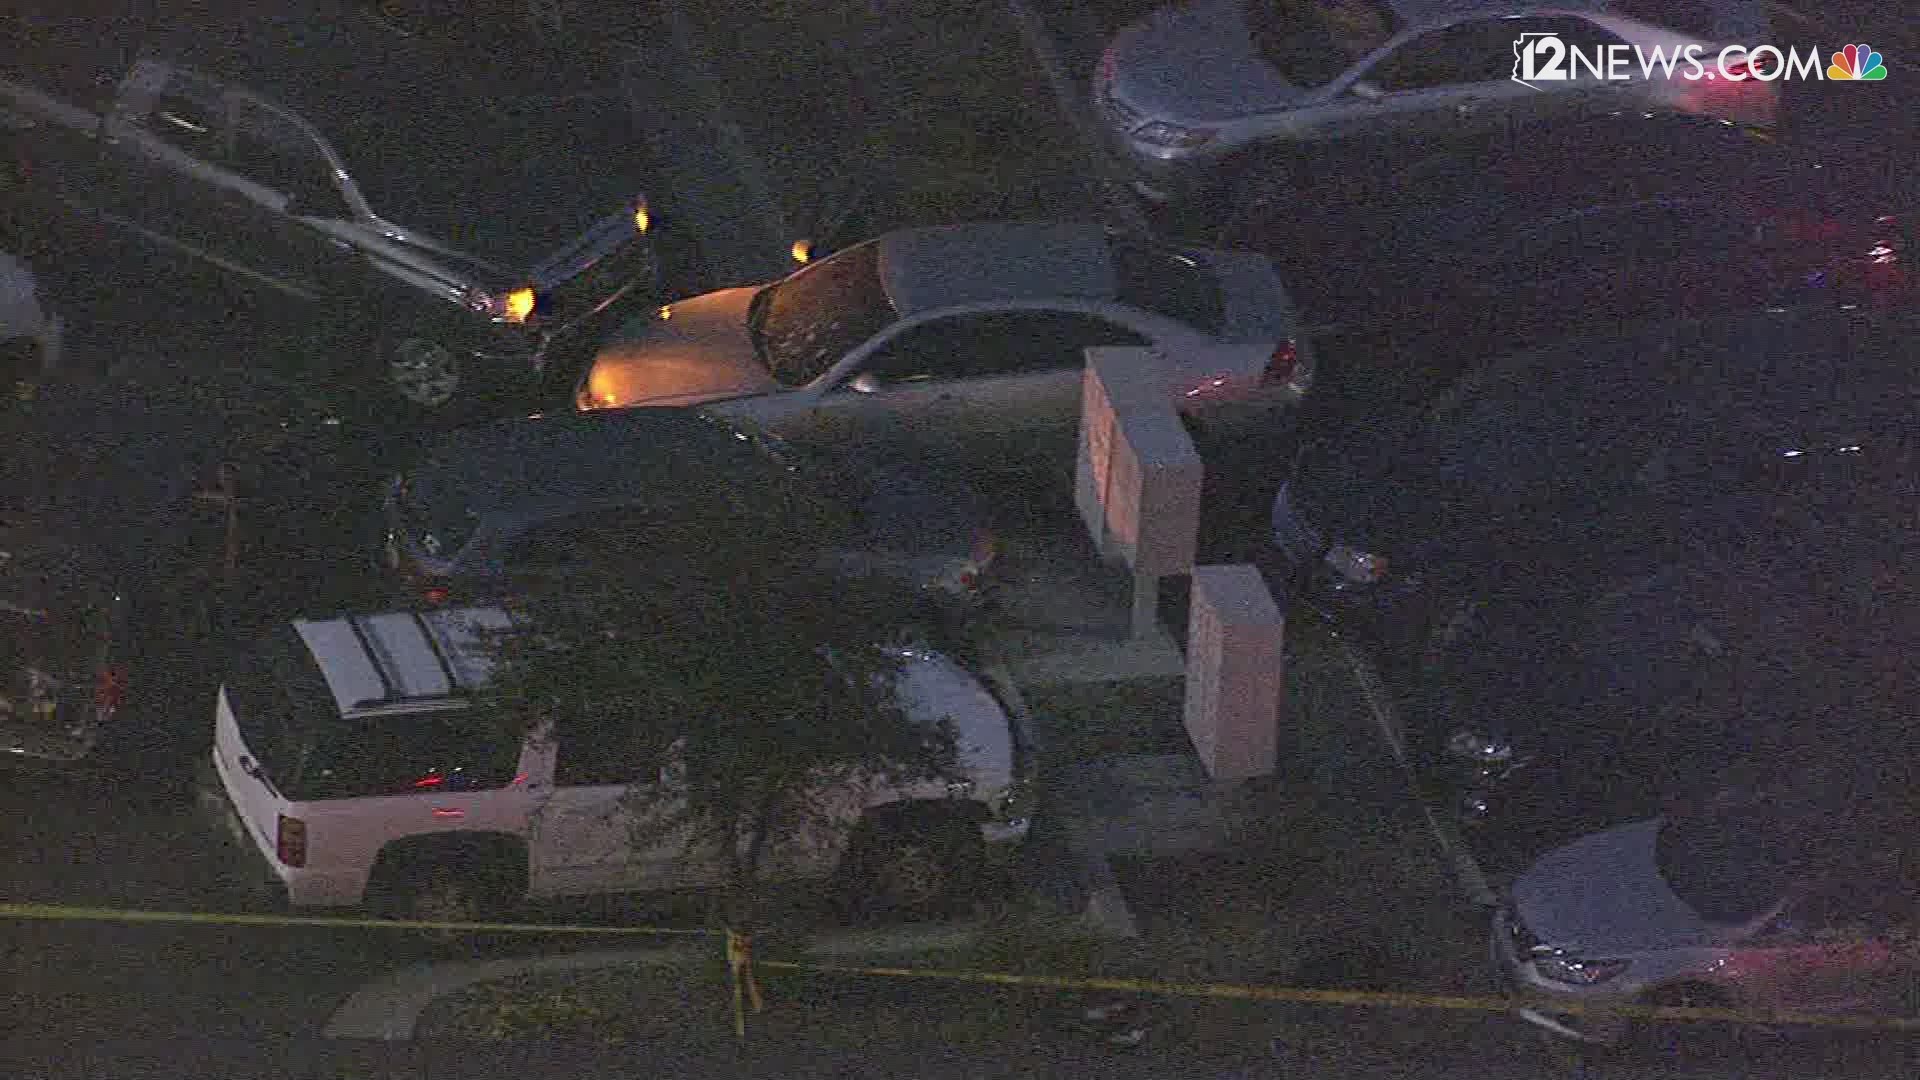 Sky 12 video shows bullet holes in a car's windshield. Police vehicles surrounded the car.